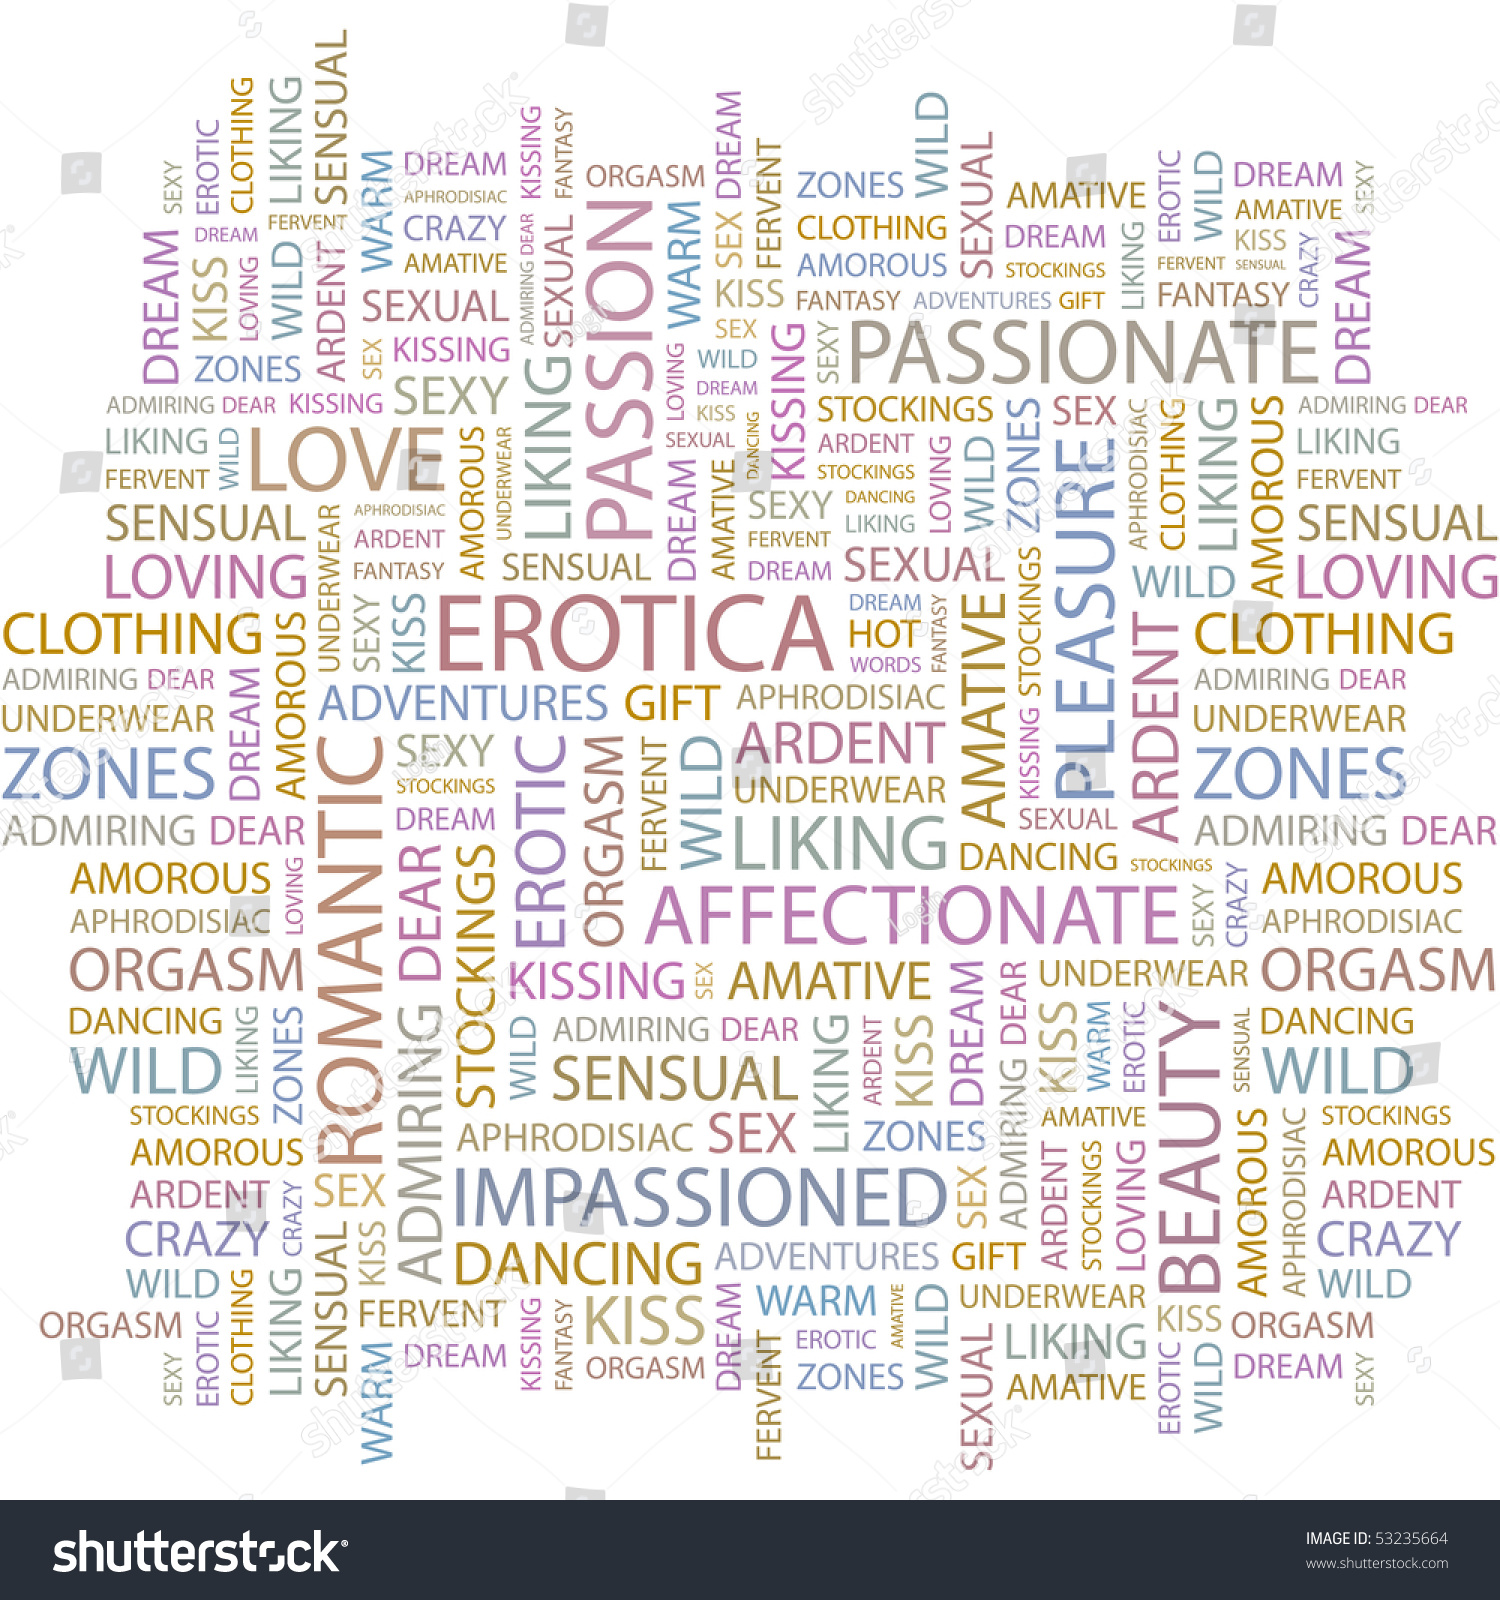 Erotica Word Collage On White Background Stock Vector Royalty Free 53235664 Shutterstock 0455